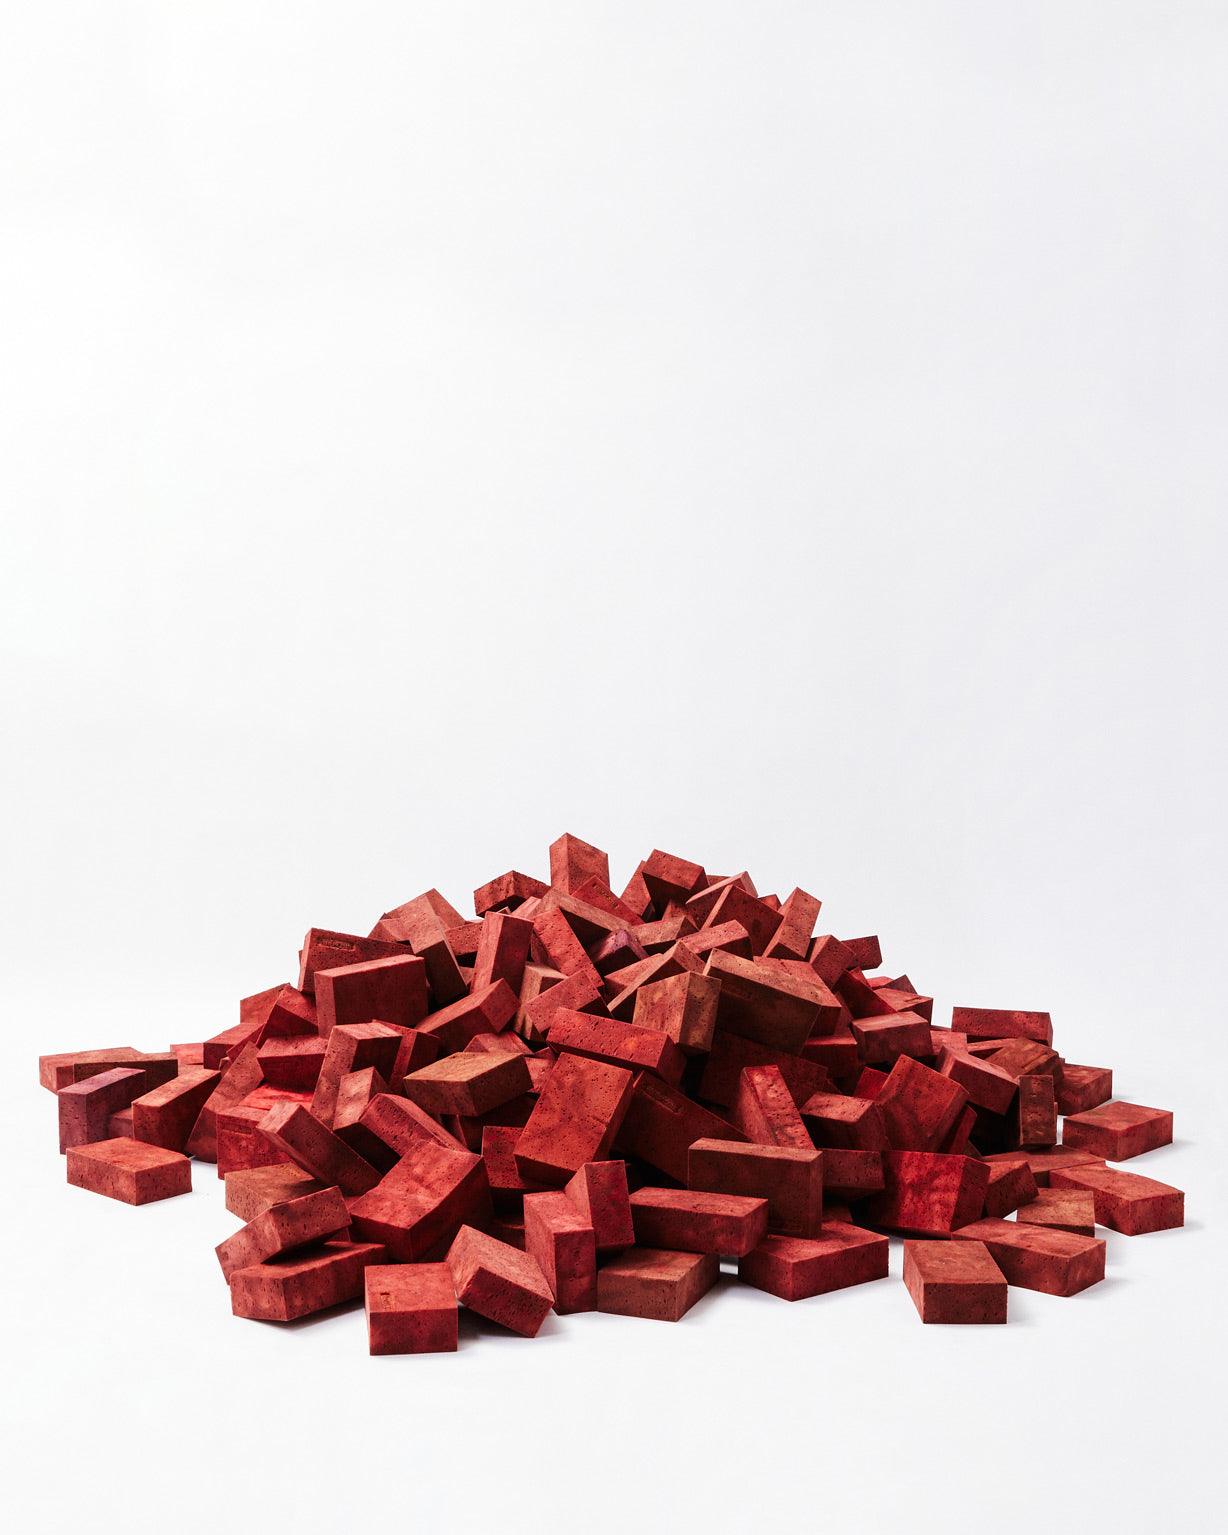 Red bricks mounted on top of each other in the shape of a mountain on a white background